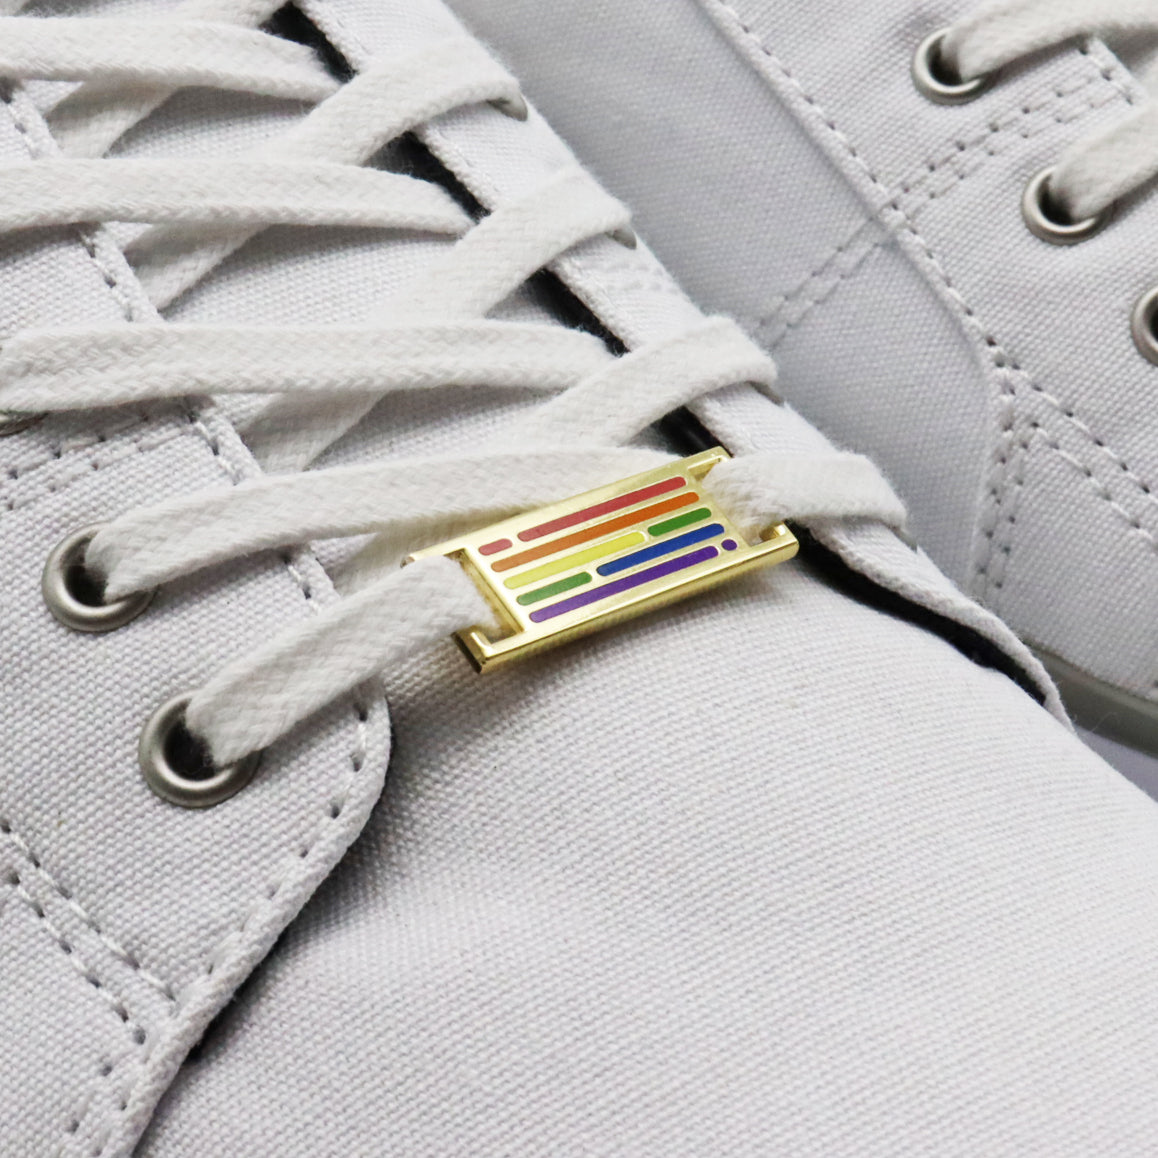 The Pansexual Shoelace Locks